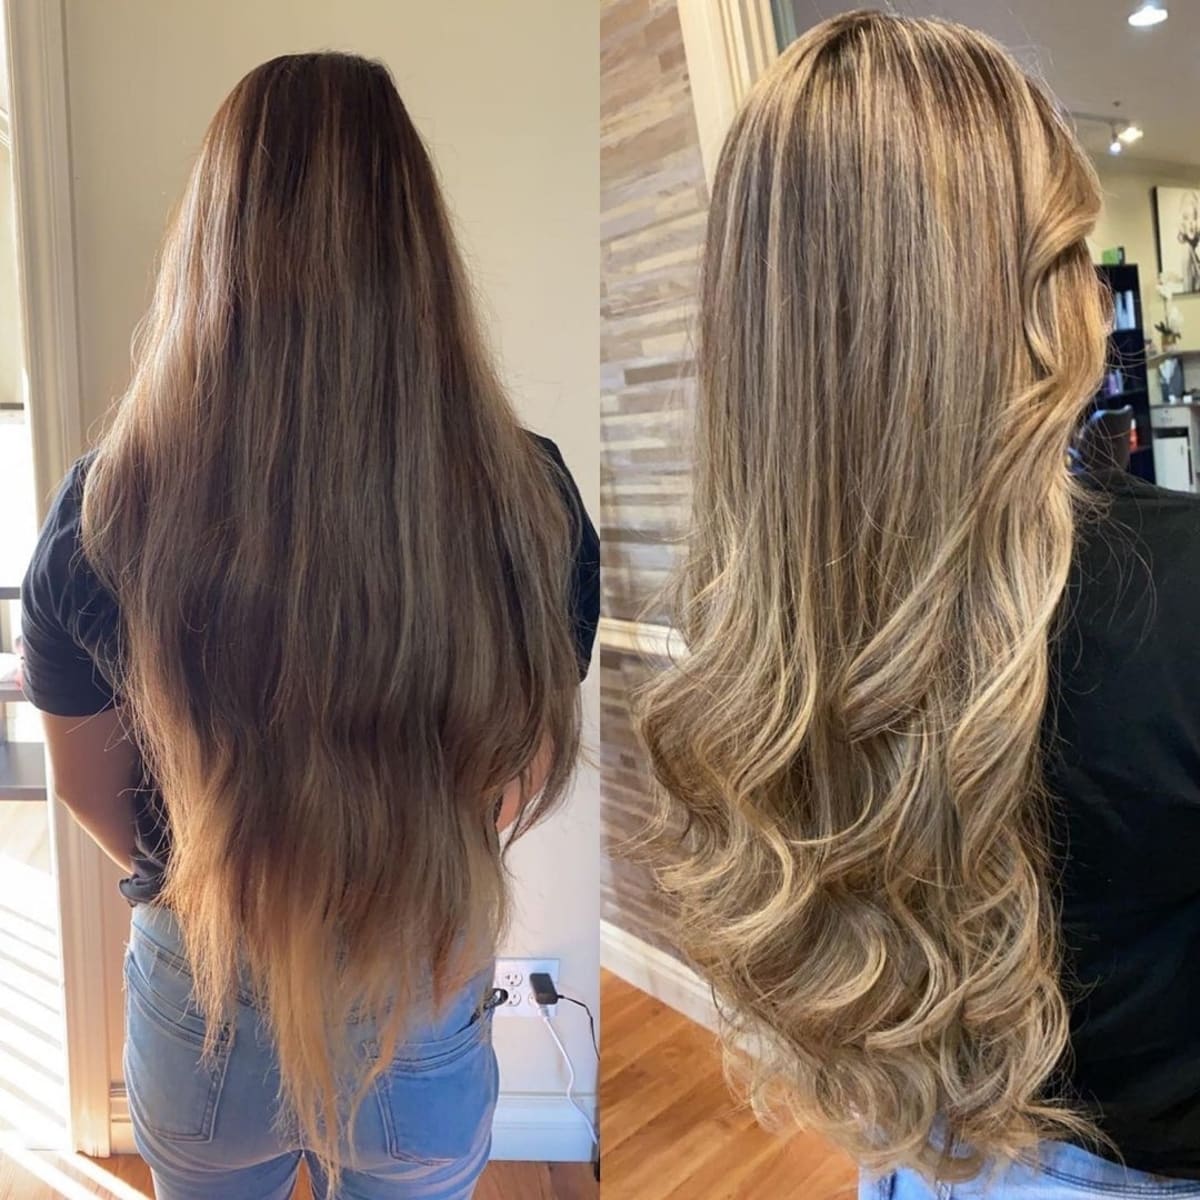 Blonde babylights with curled ends on long fine hair